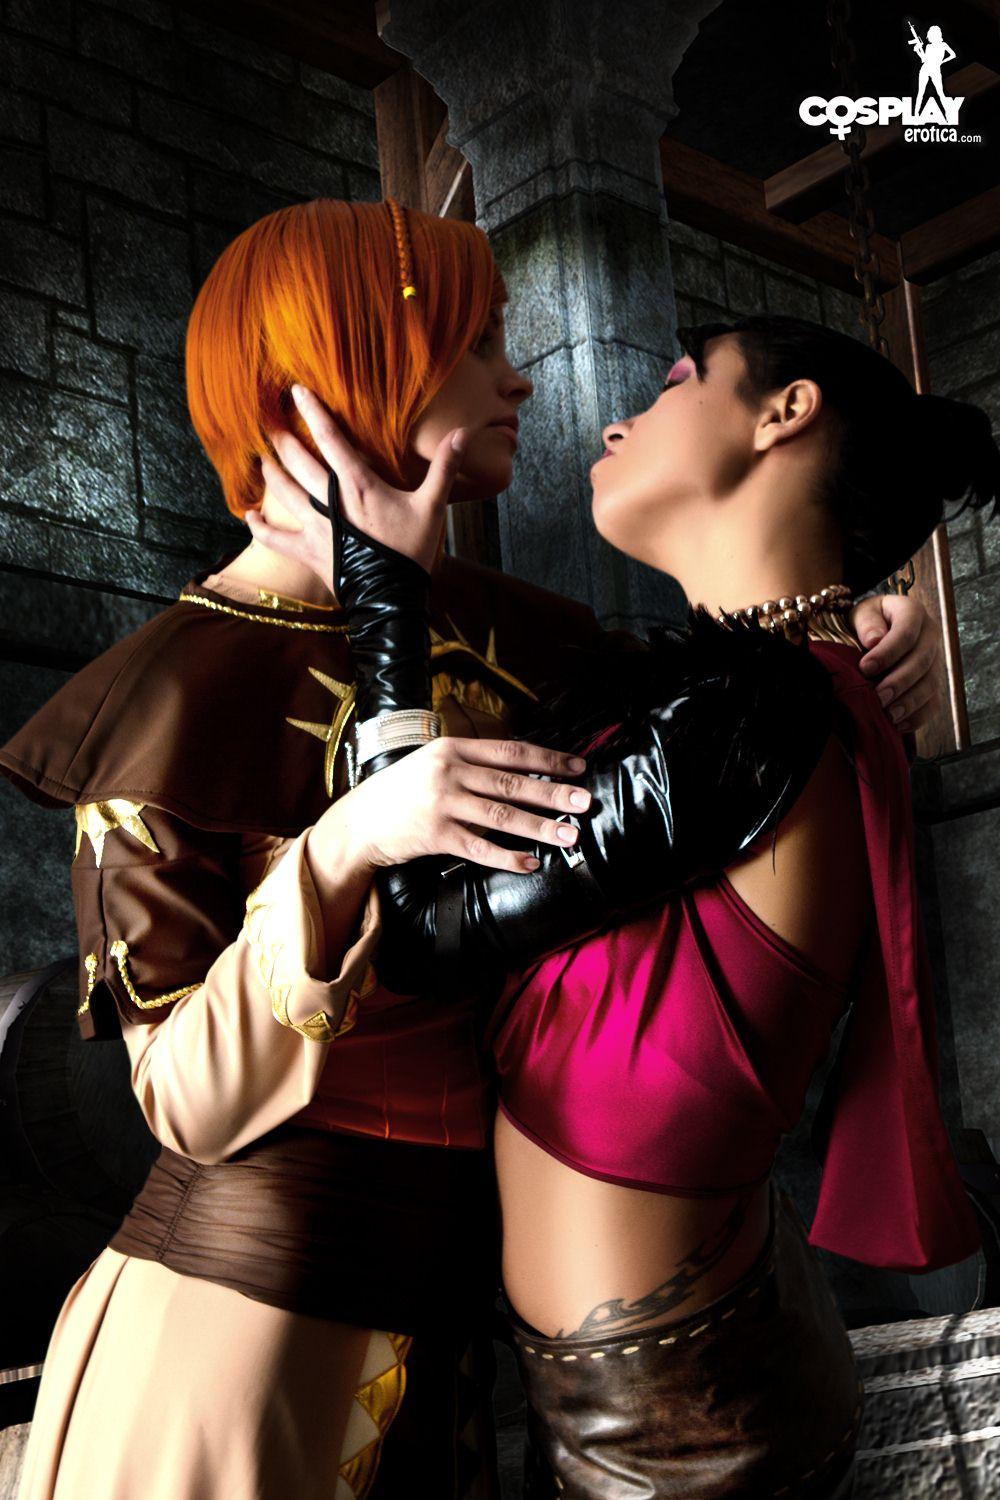 Pictures of Nayma and Mea doing a hot lesbian Dragon Age cosplay #59444453